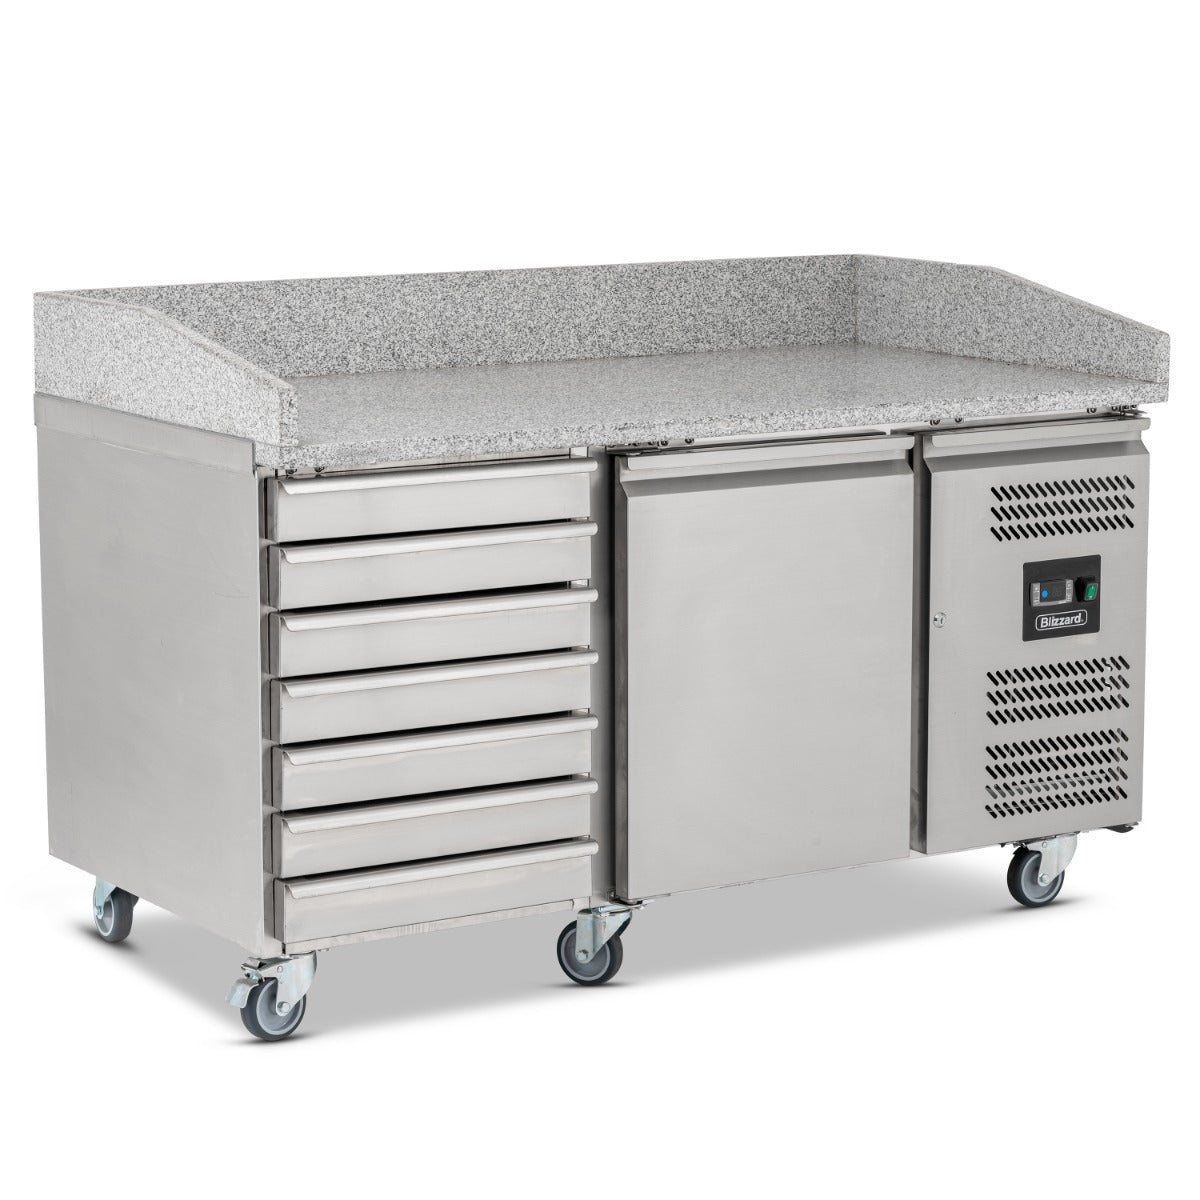 Blizzard 1 Dr Pizza Prep Counter with Neutral drawers 390L